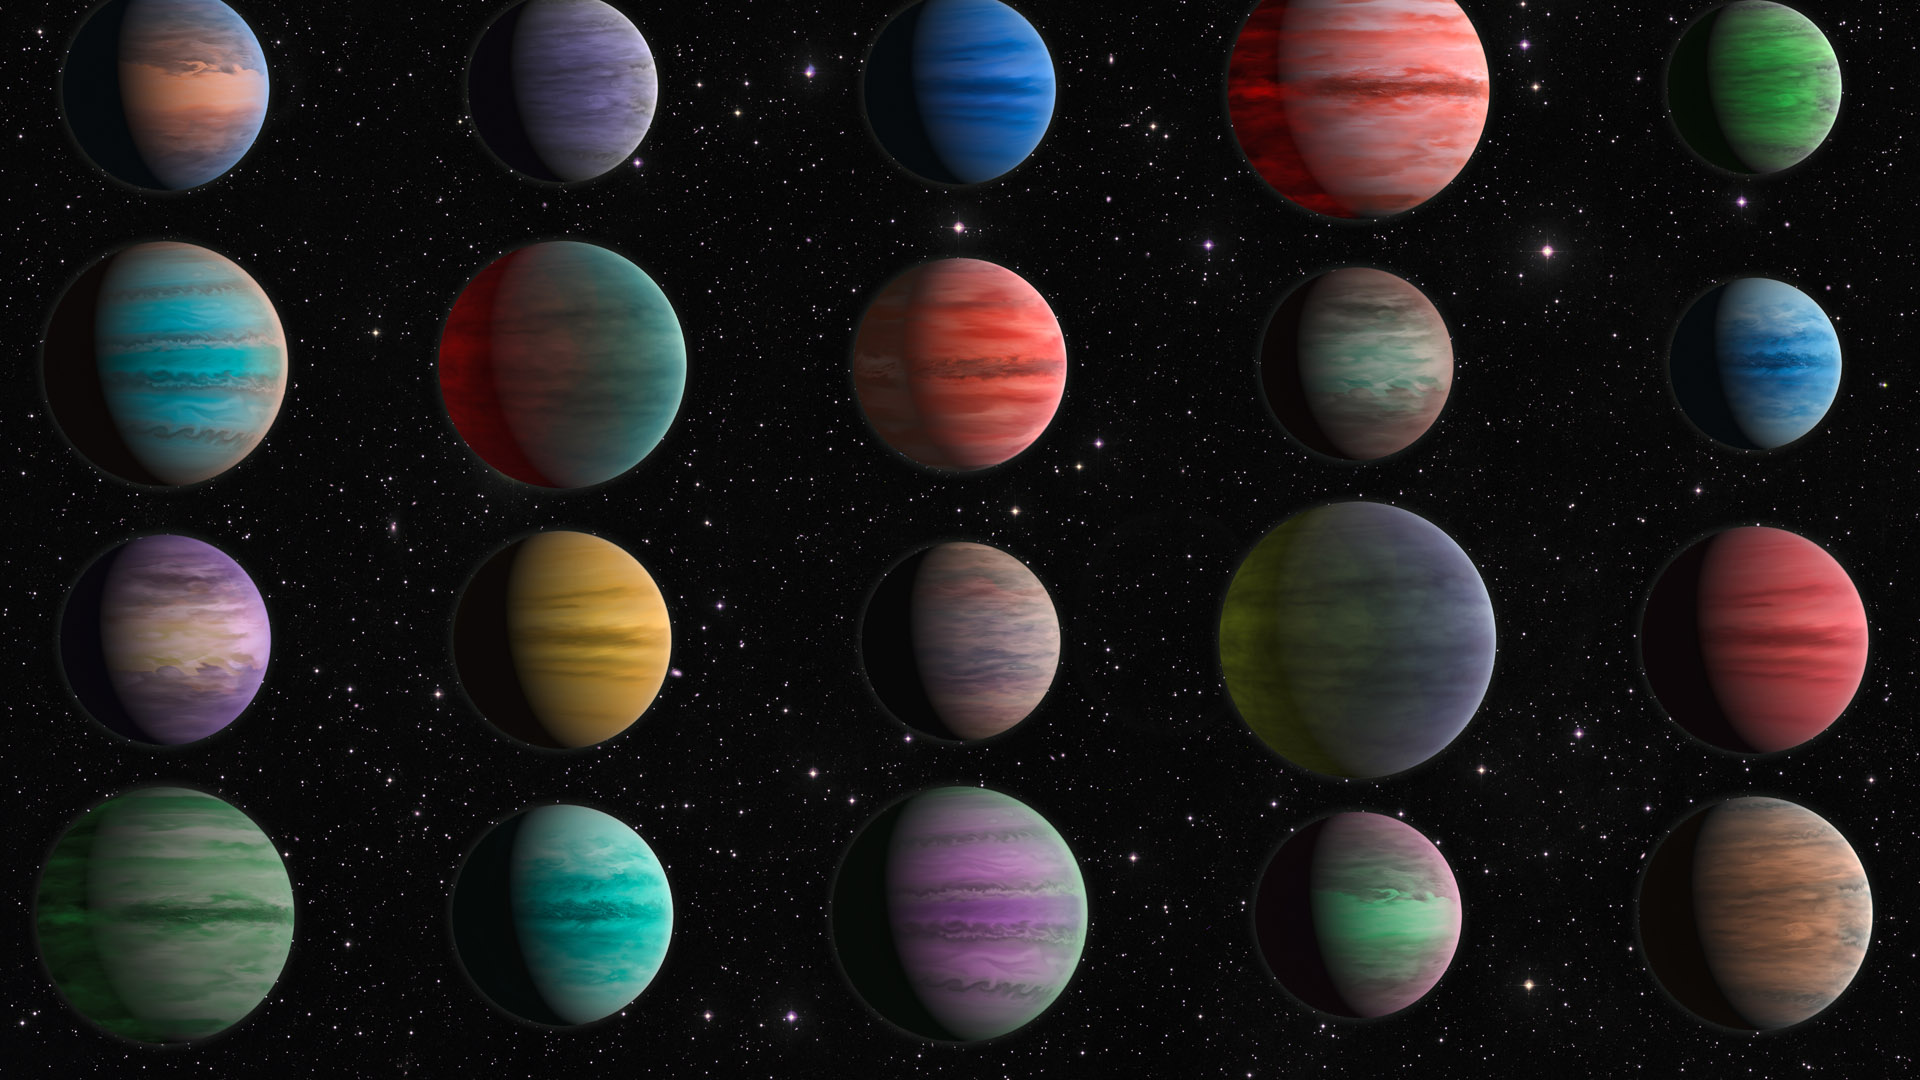 a grid view of various exoplanet artistic illustrations